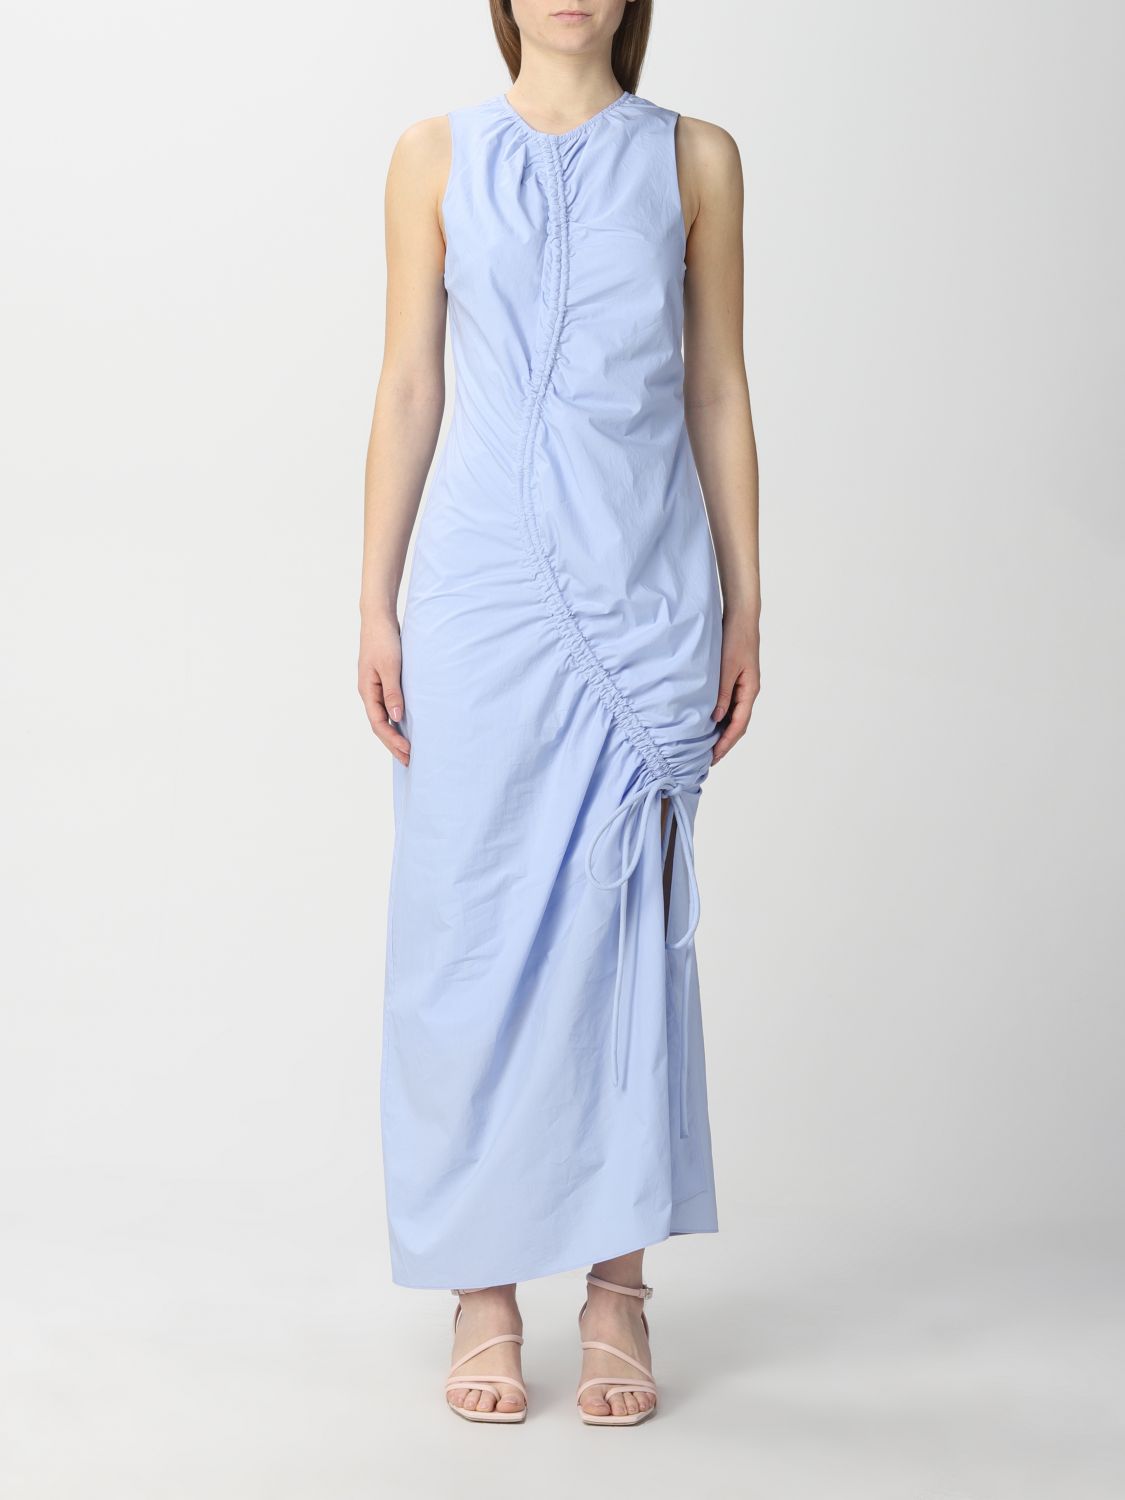 Sir The Label Dresses  Women In Gnawed Blue